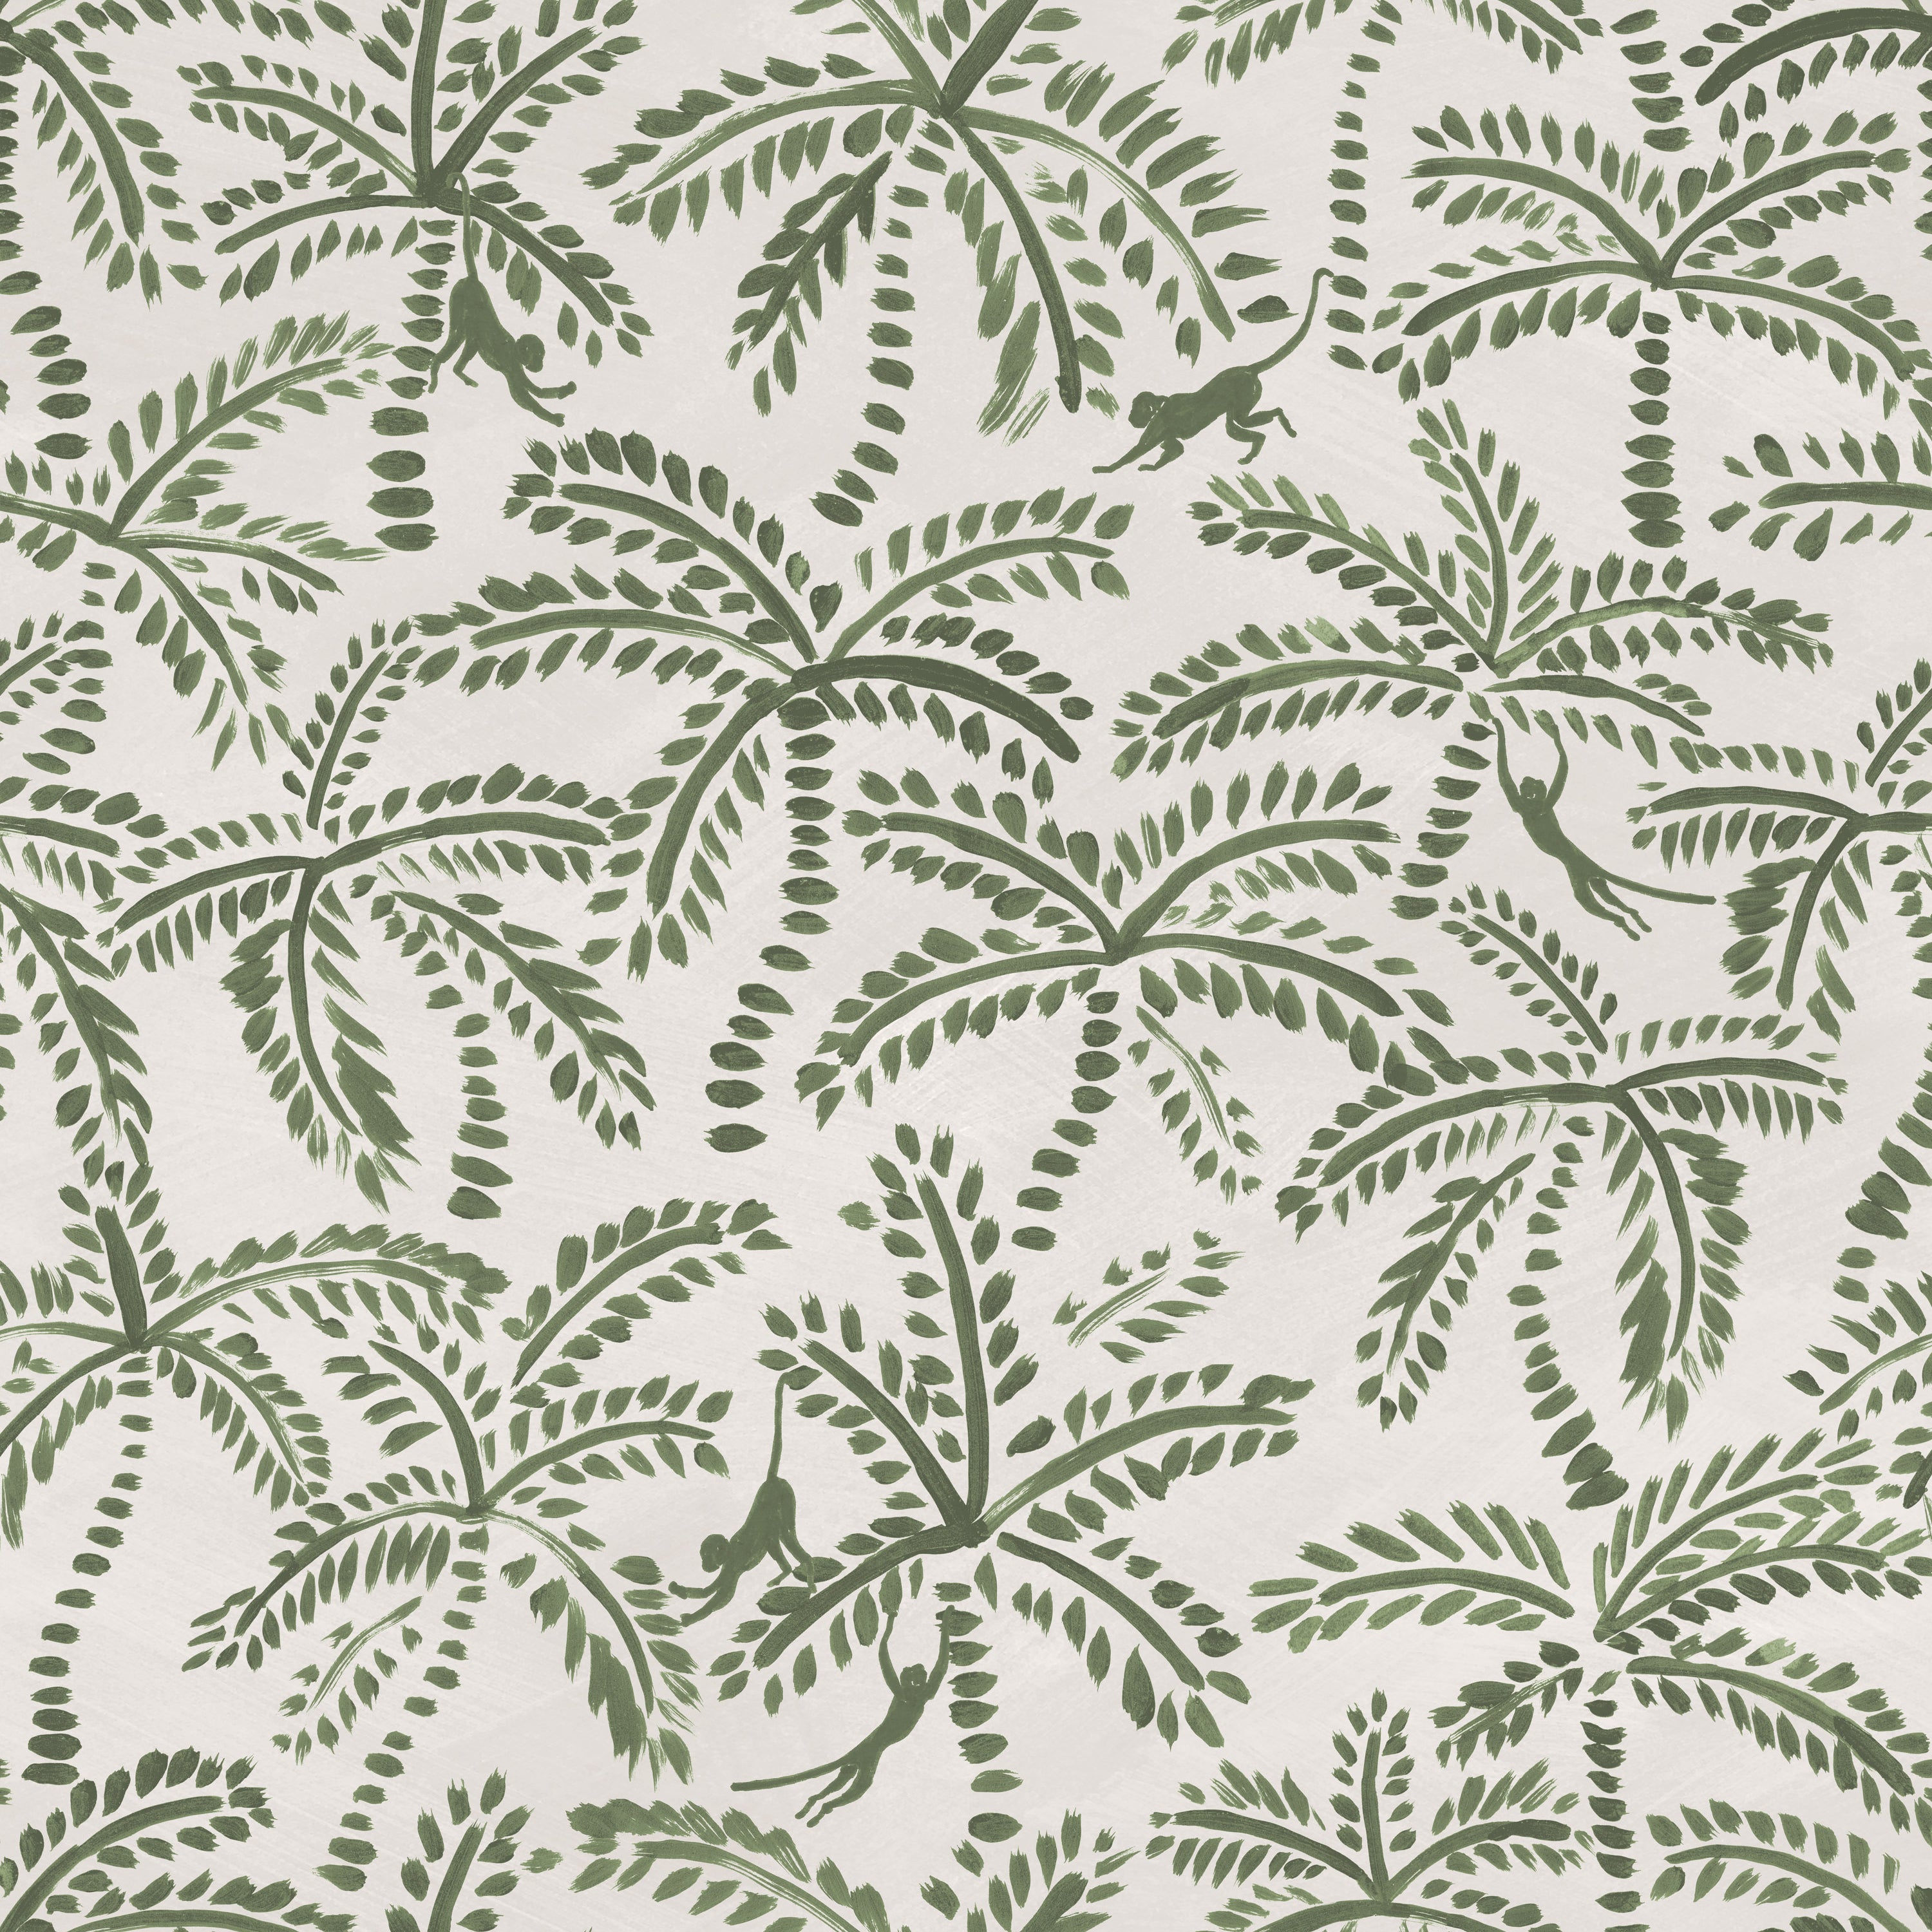 Detail of wallpaper in a playful palm tree and monkey print in green on a cream field.